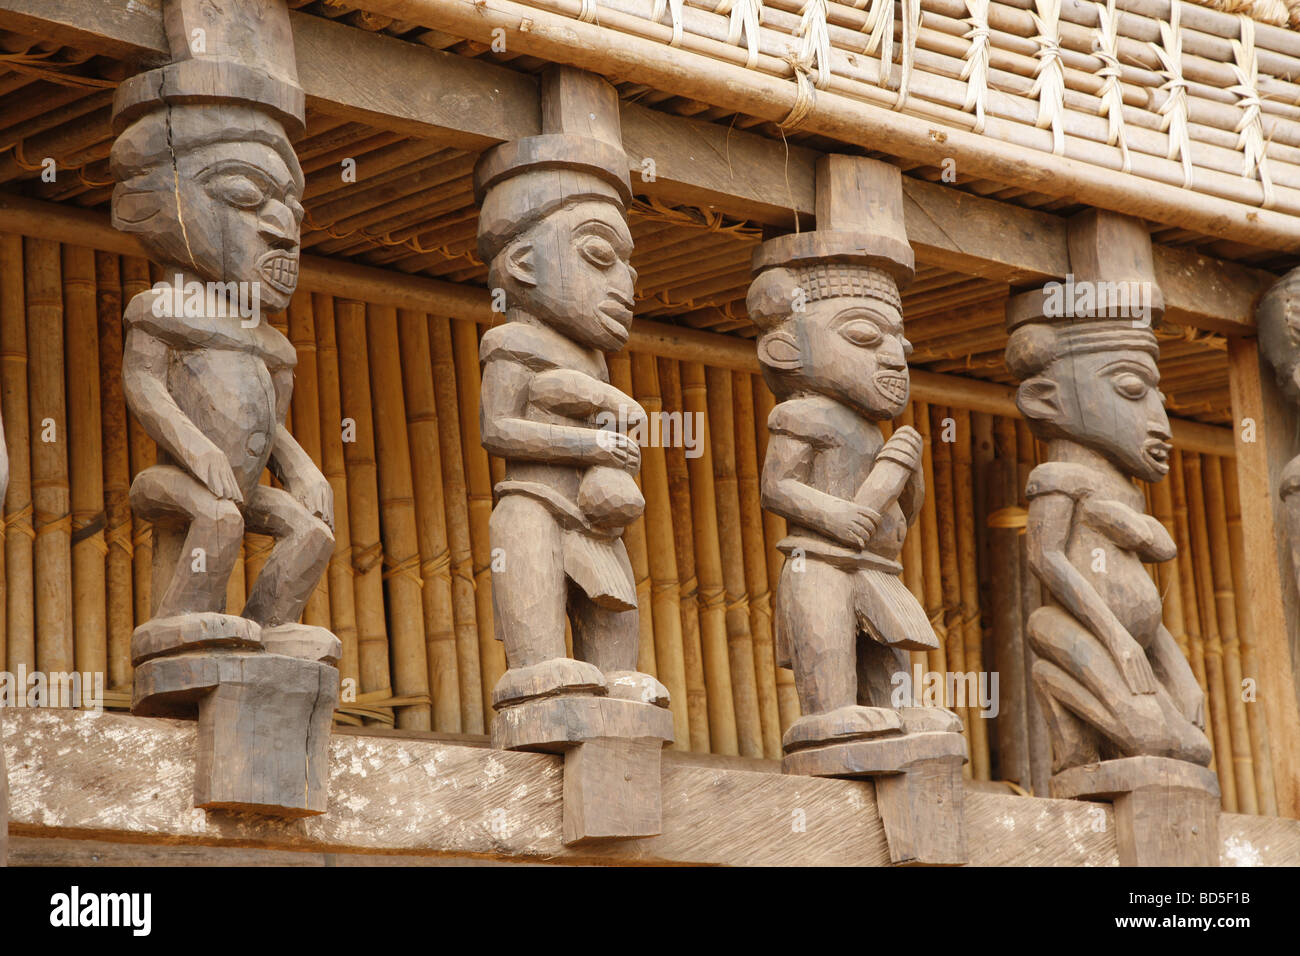 Wooden columns in the Tam-Tam House, Foumban, Cameroon, Africa Stock Photo